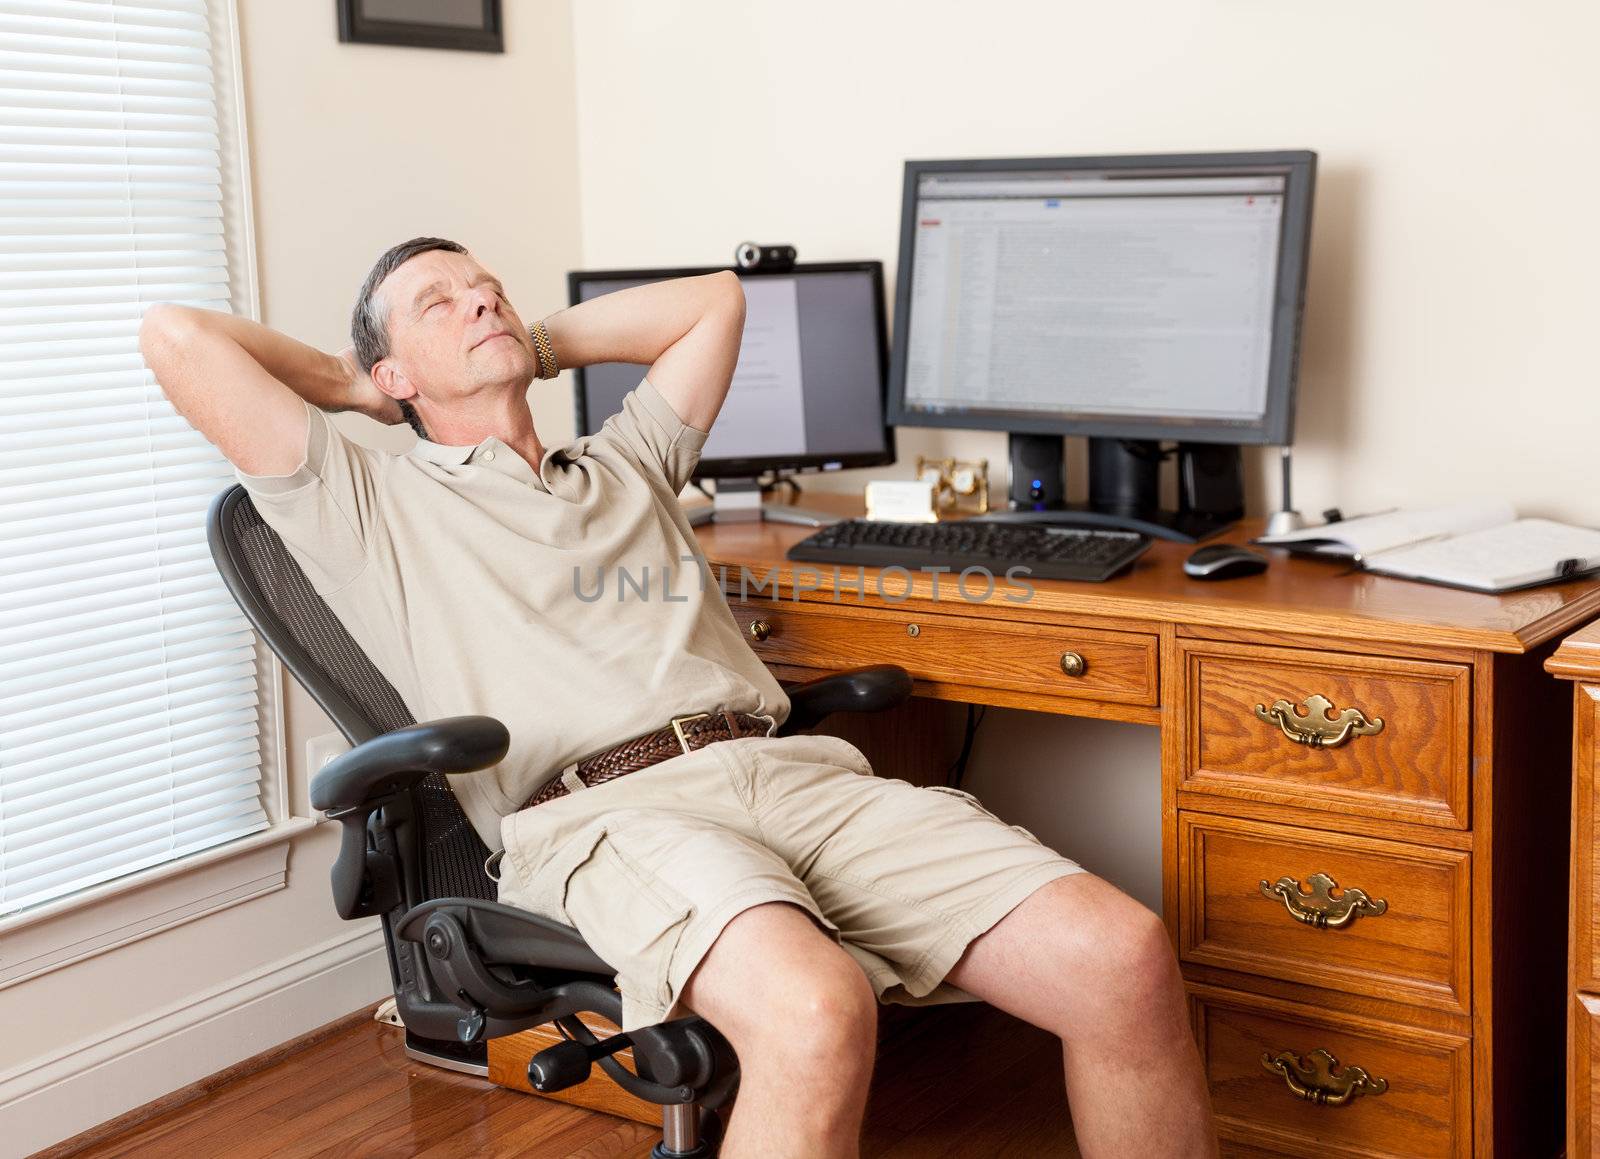 Senior caucasian man working from home in shorts with desk with two monitors